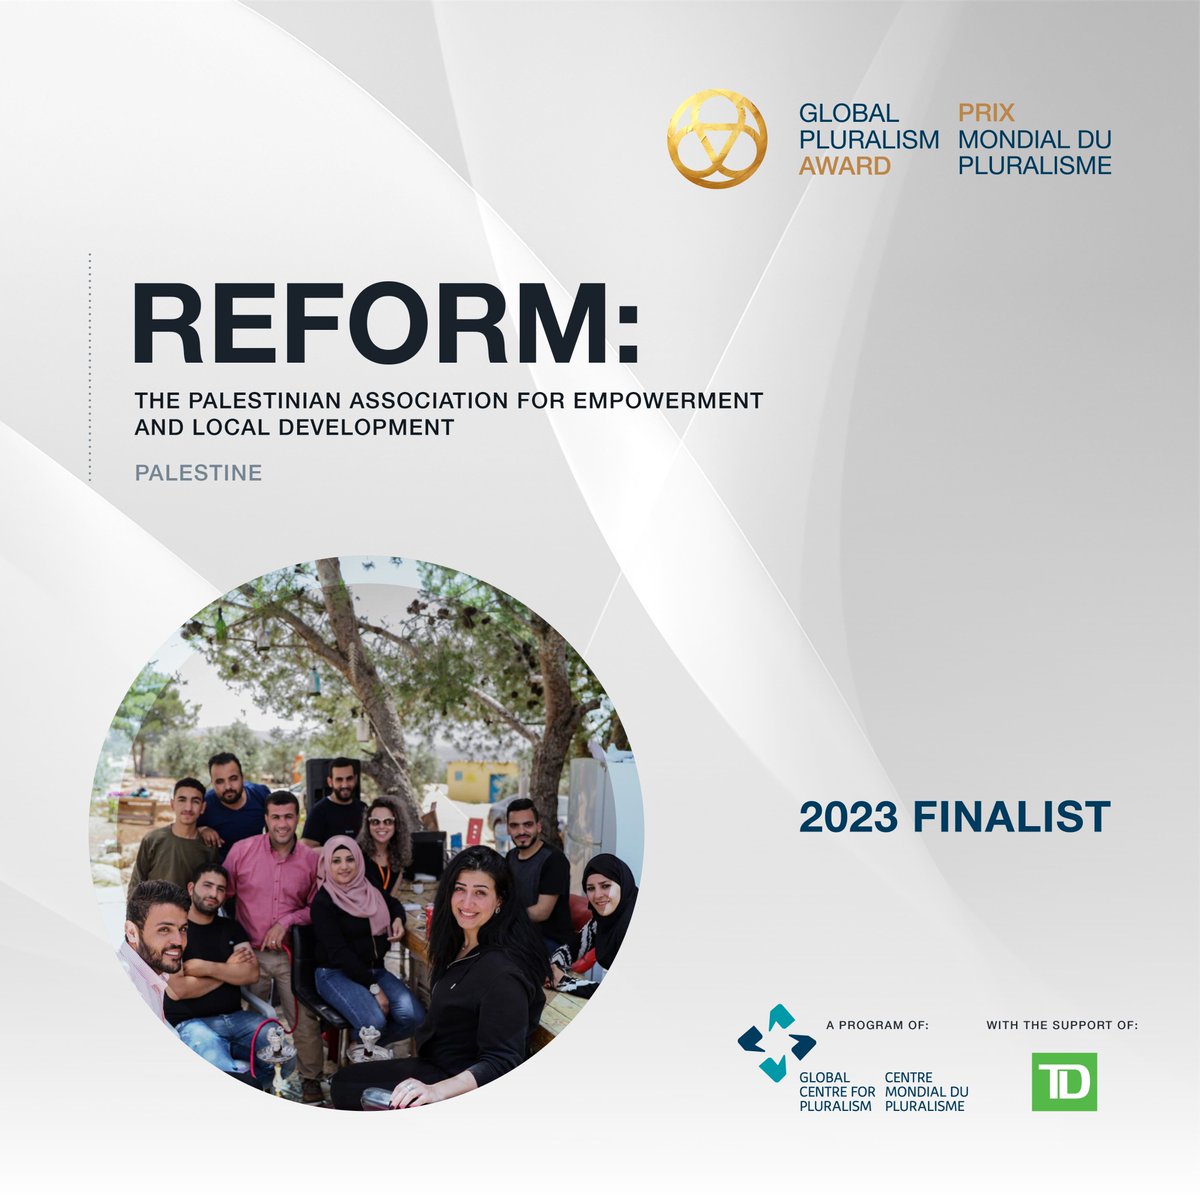 We’re thrilled to share that we’ve been named one of the finalists for #GlobalPluralismAward, recognising our efforts to address political divides & promote the participation of marginalised groups and women in social life ! Thank you @GlobalPluralism for the recognition! #REFORM